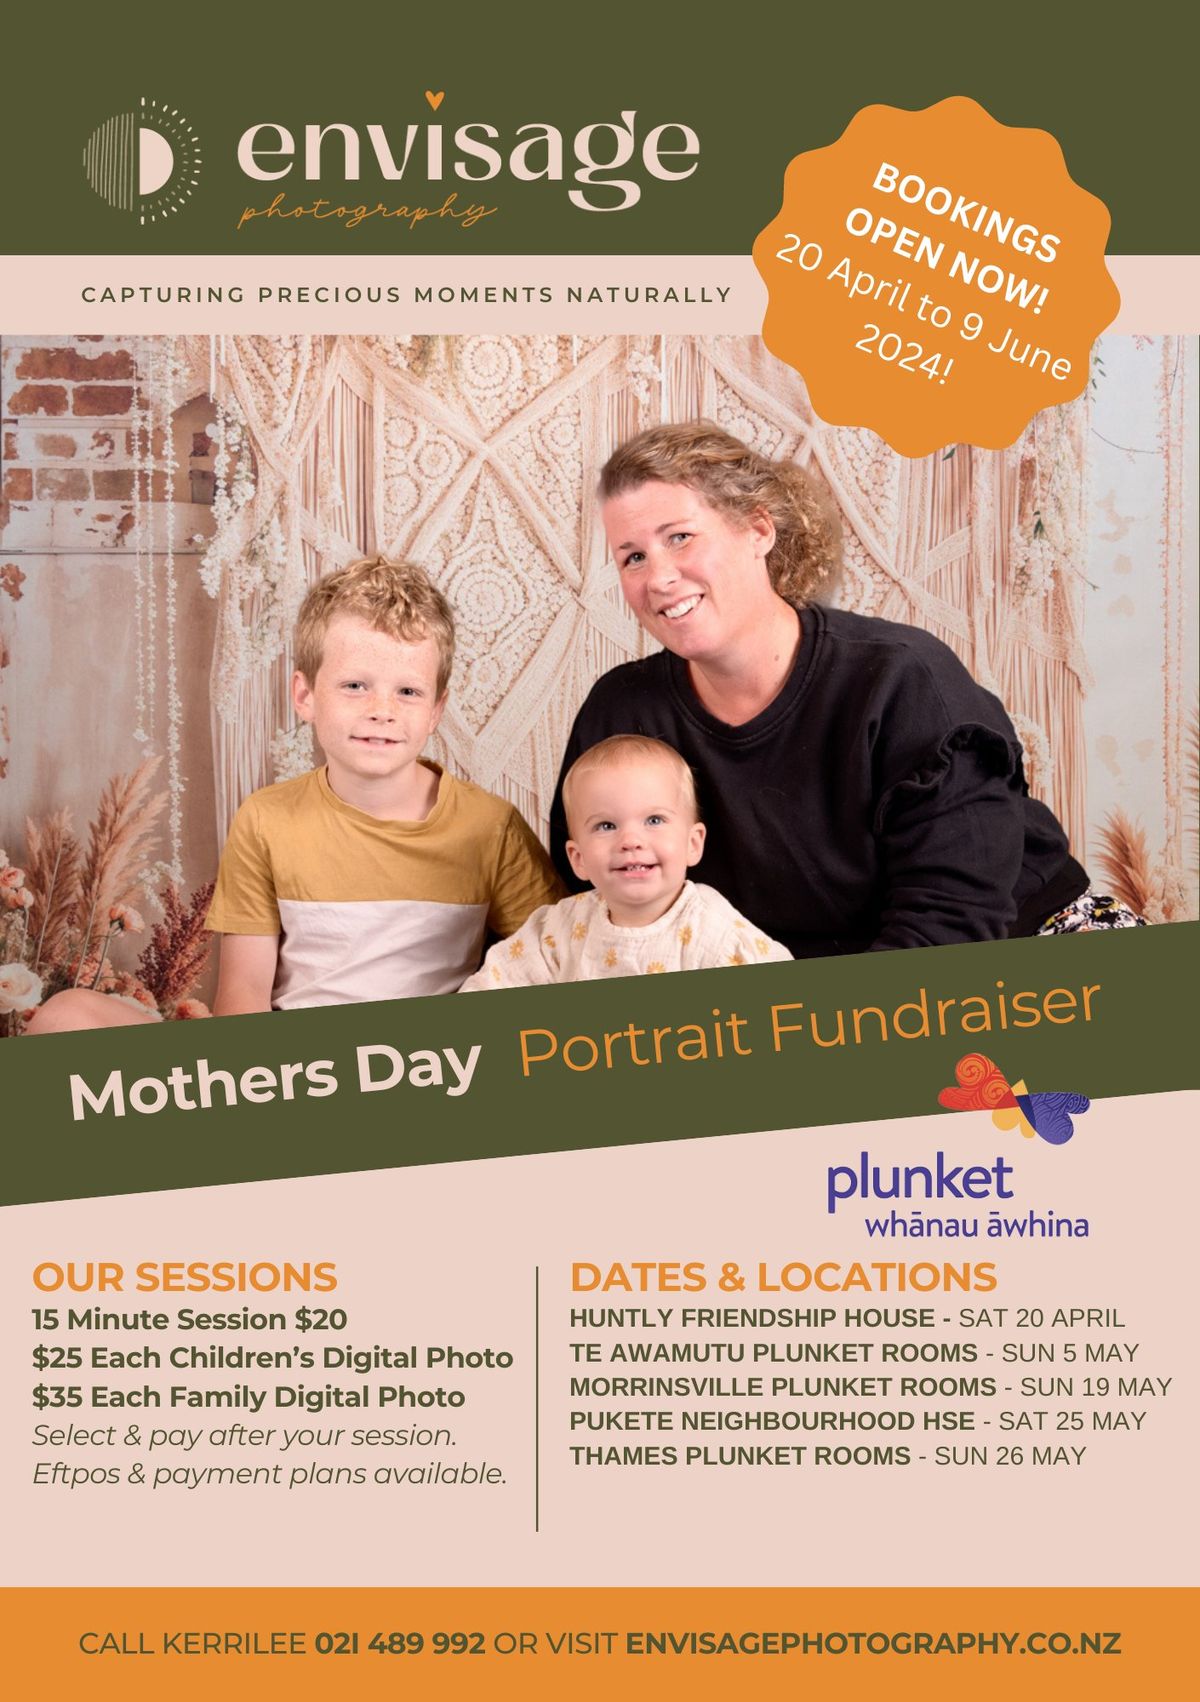 Plunket Morrinsville Mothers' Day Photos